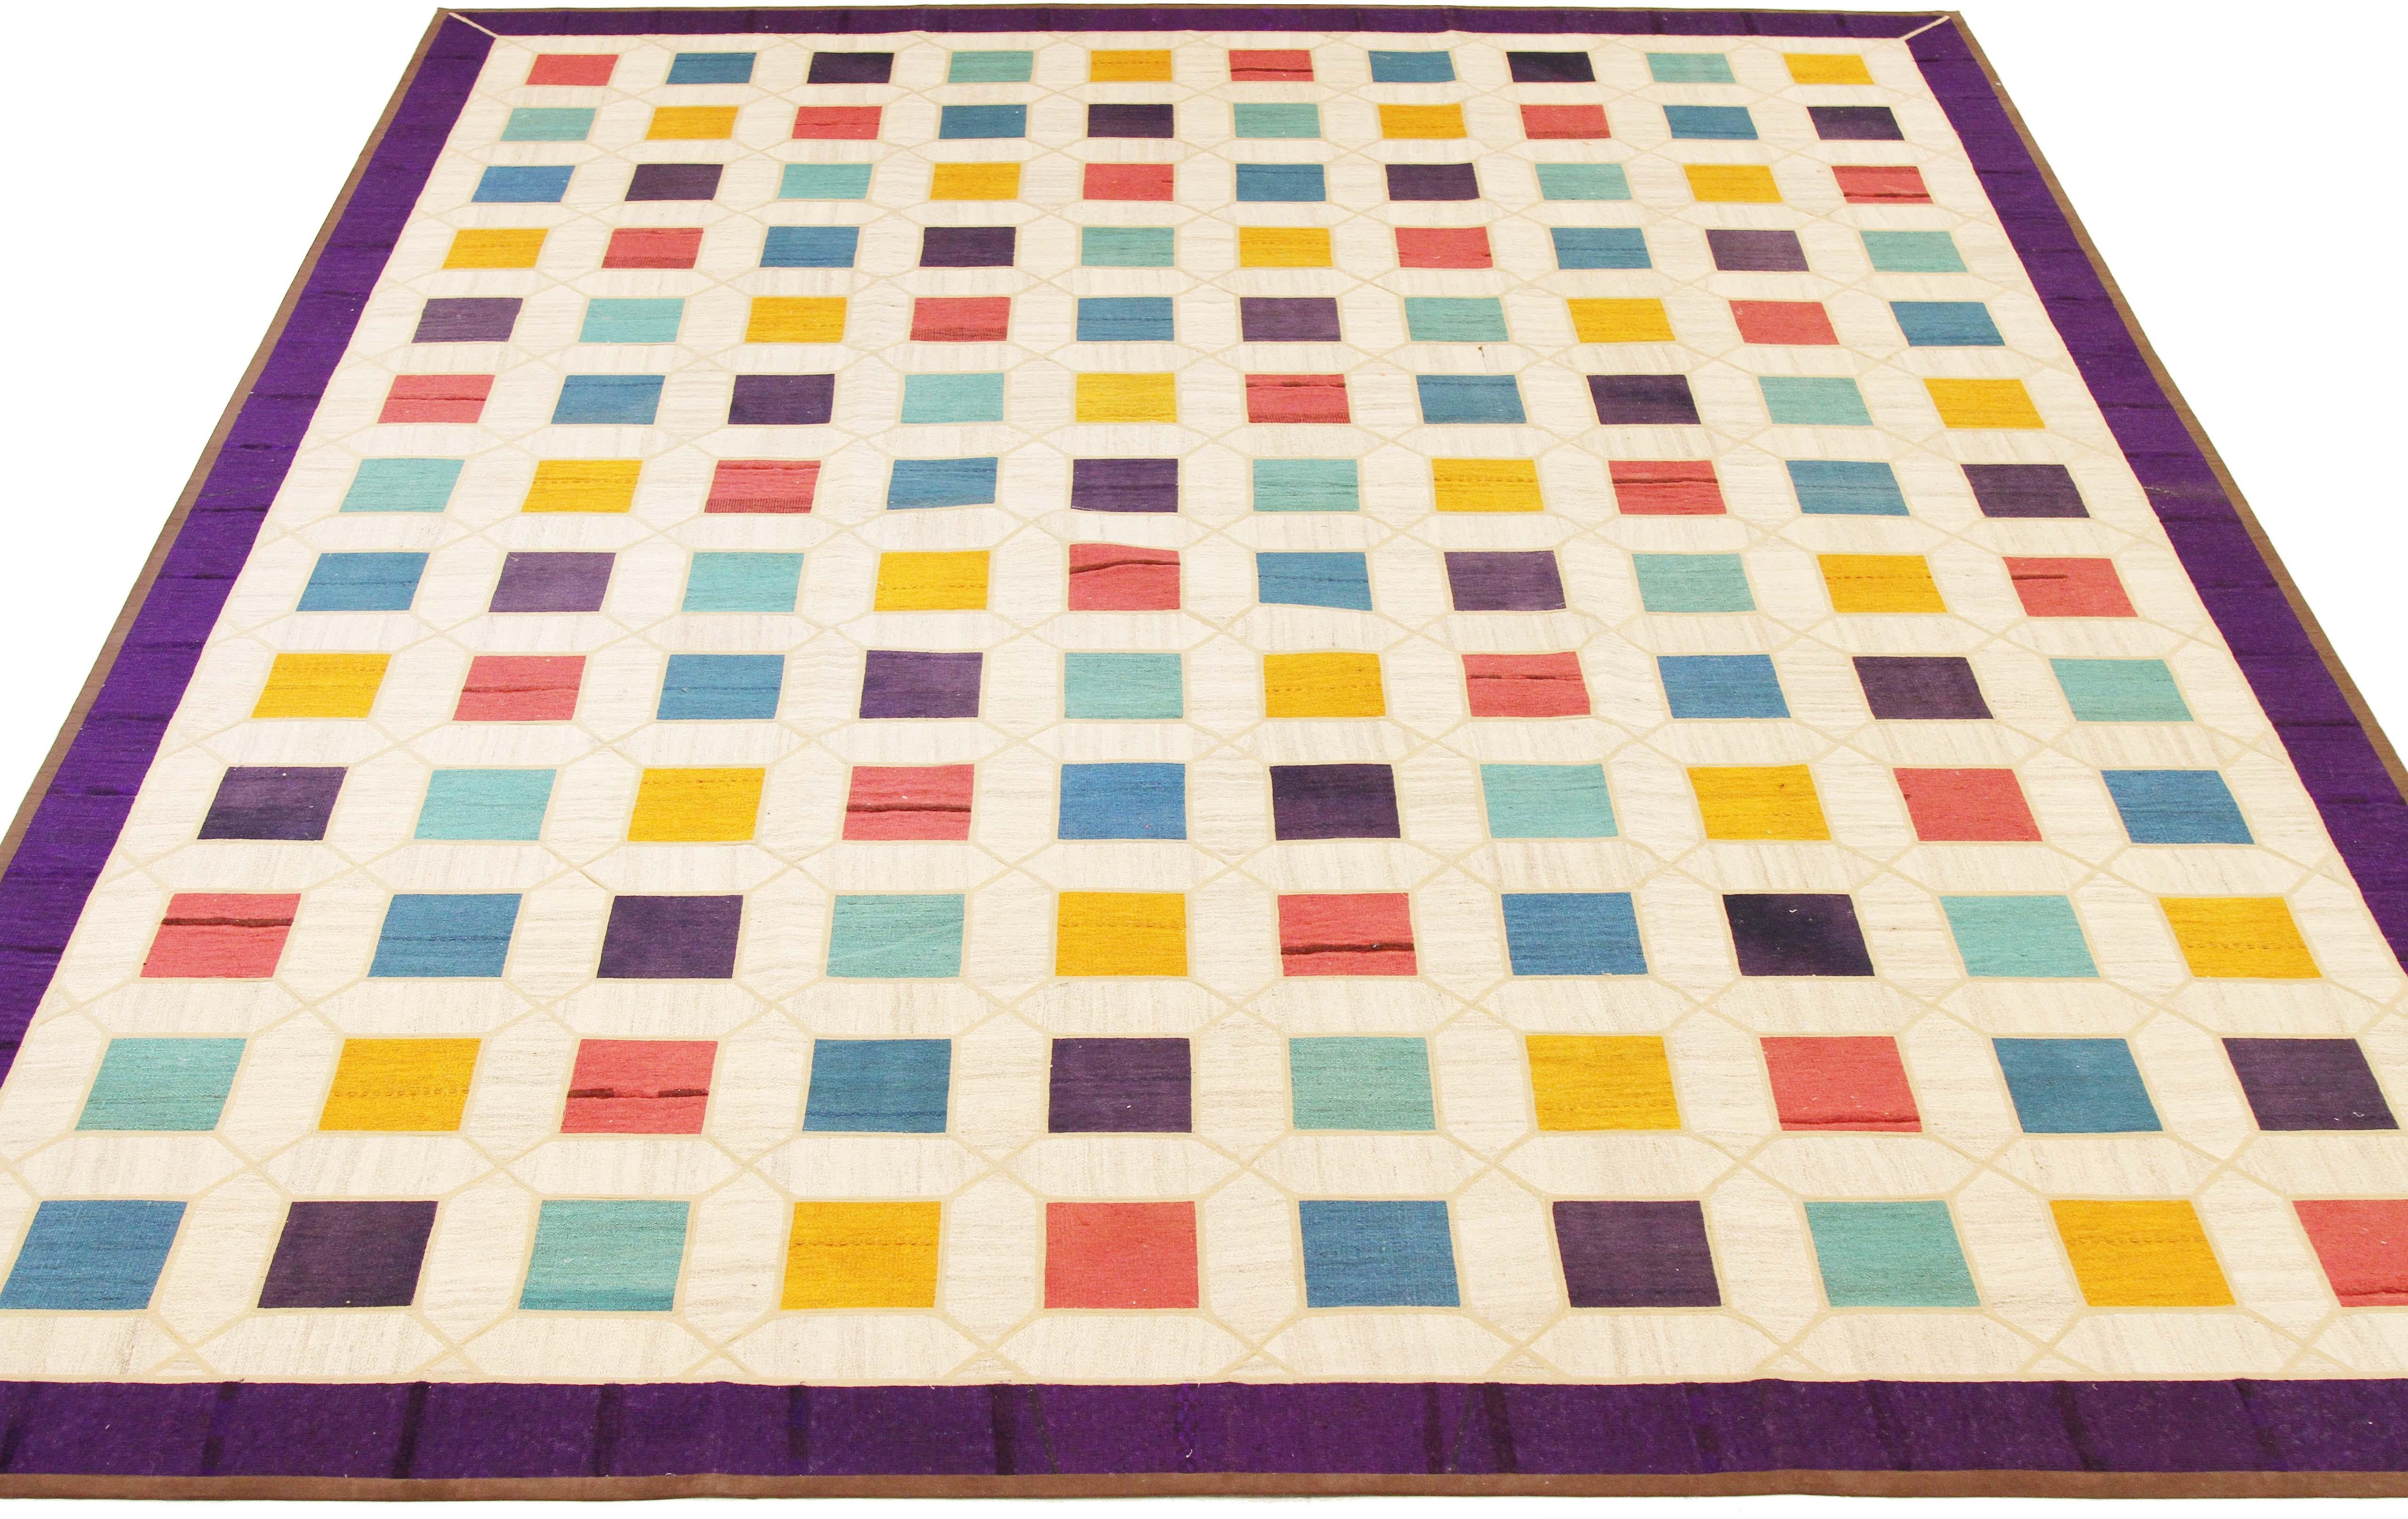 Modern Turkish rug handwoven from the finest sheep’s wool and colored with all-natural vegetable dyes that are safe for humans and pets. It’s a traditional Patch Kilim flat-weave design featuring colored squares on an ivory field. It’s a stunning